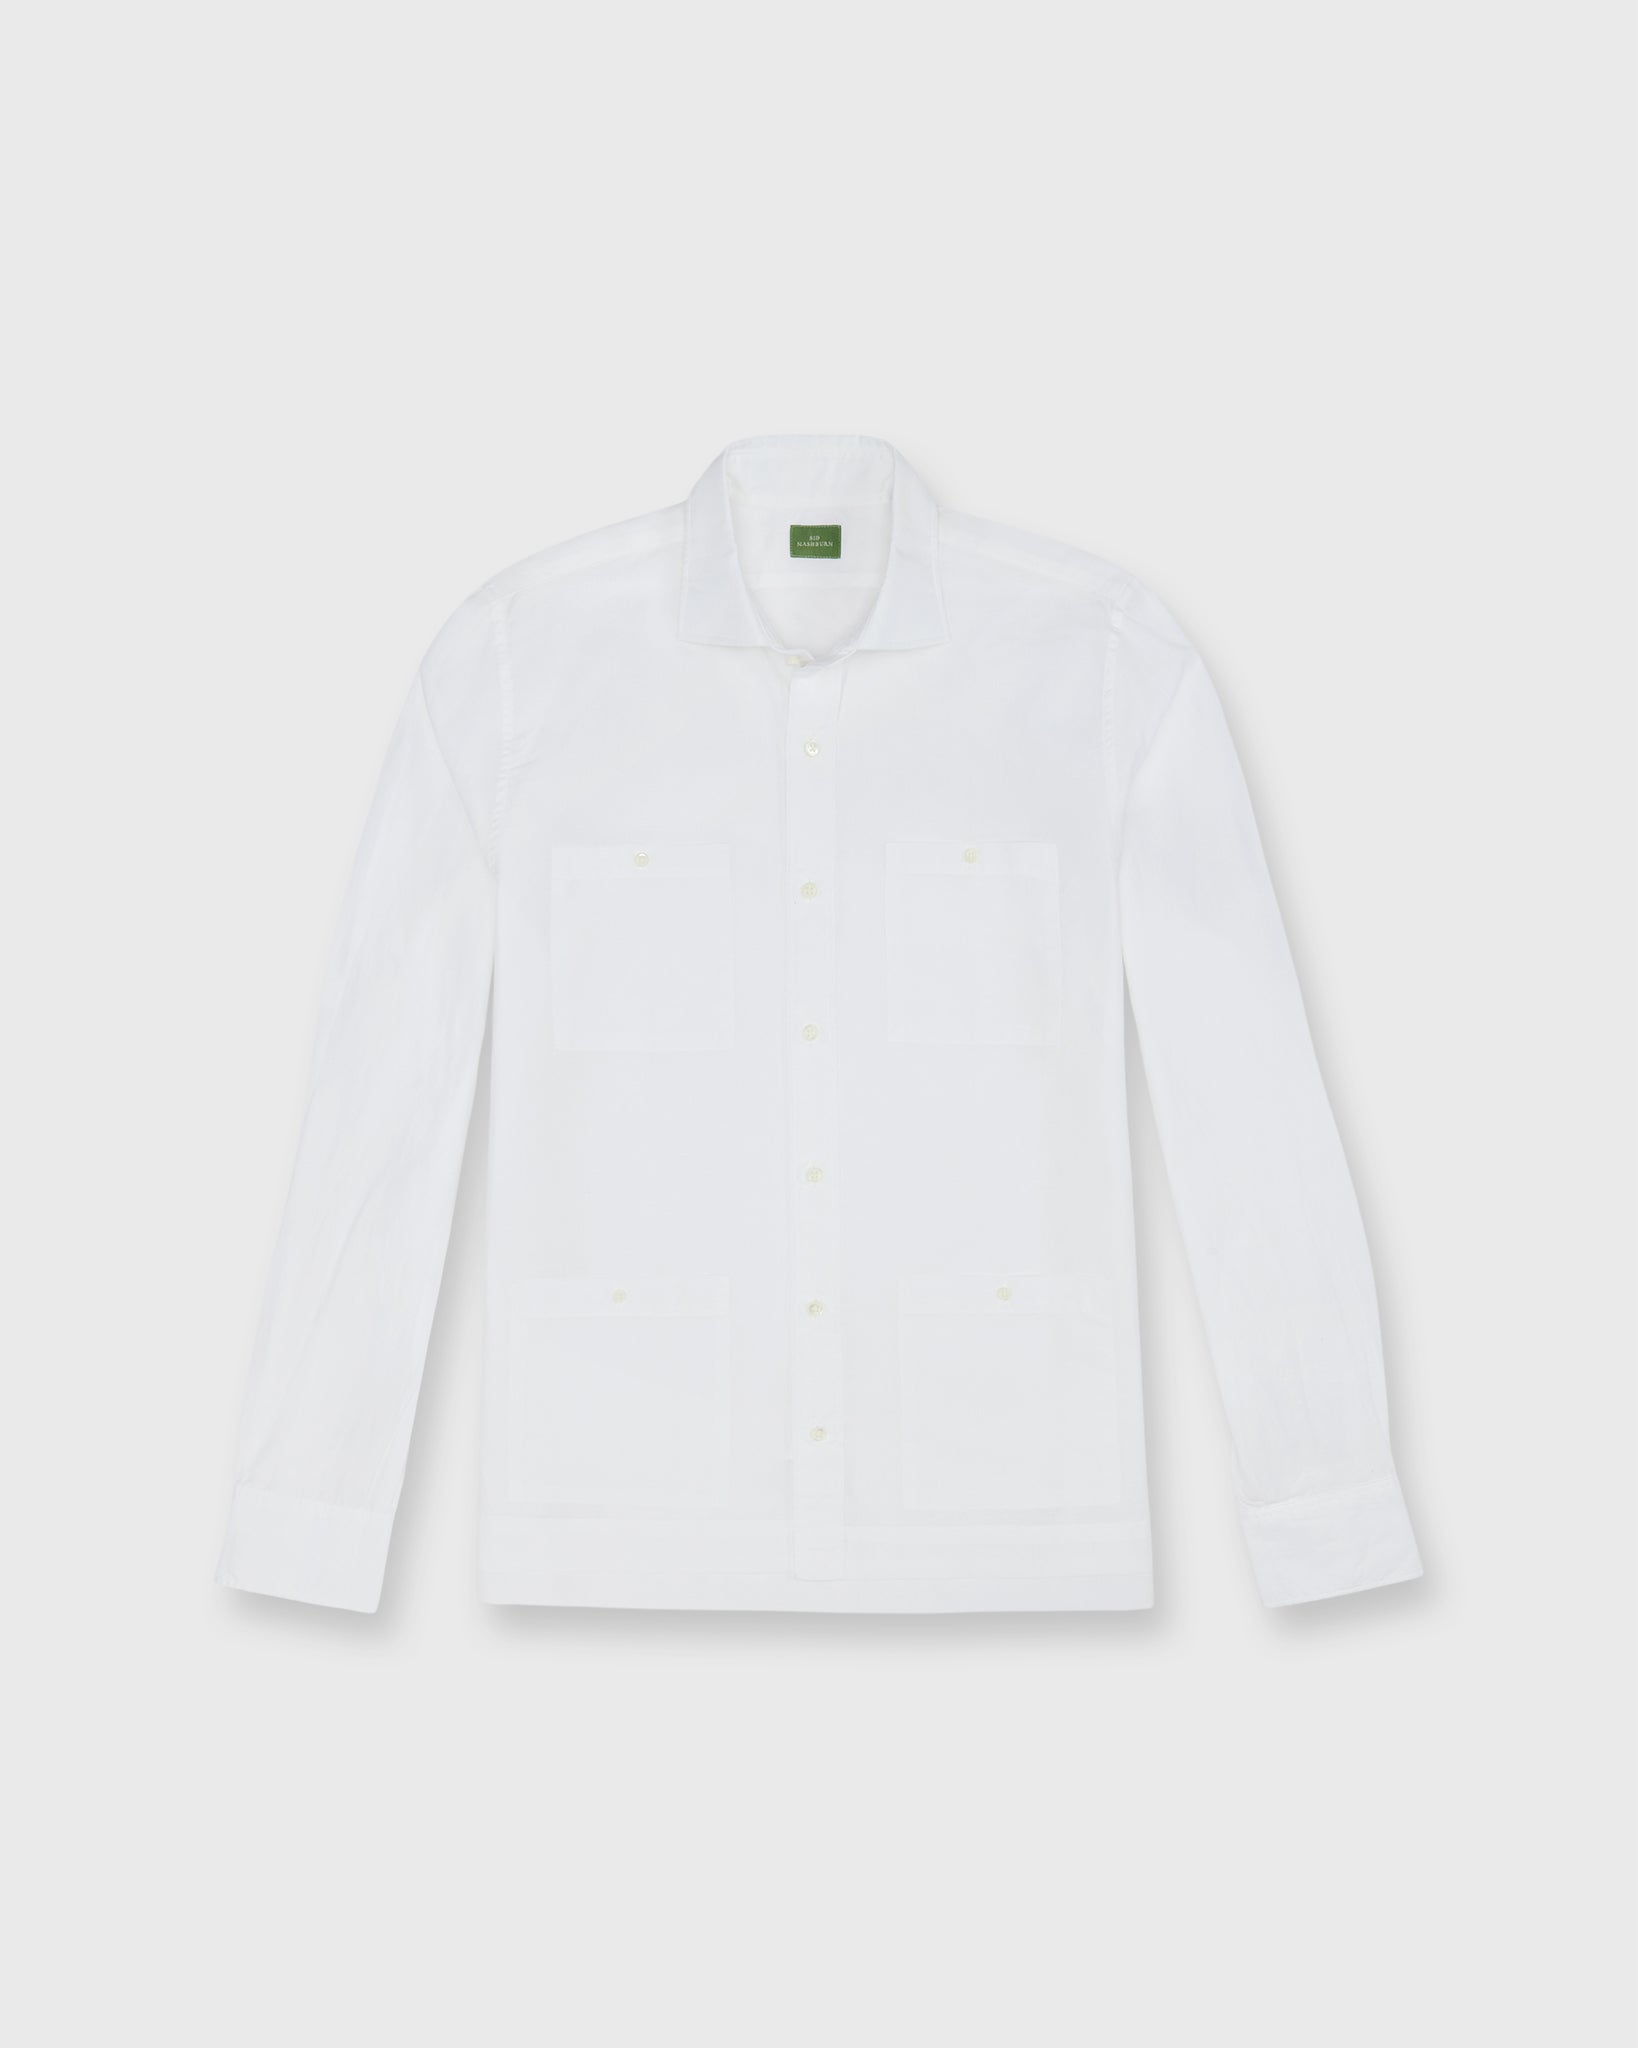 Long-Sleeved Marquez Shirt in White Cotolino